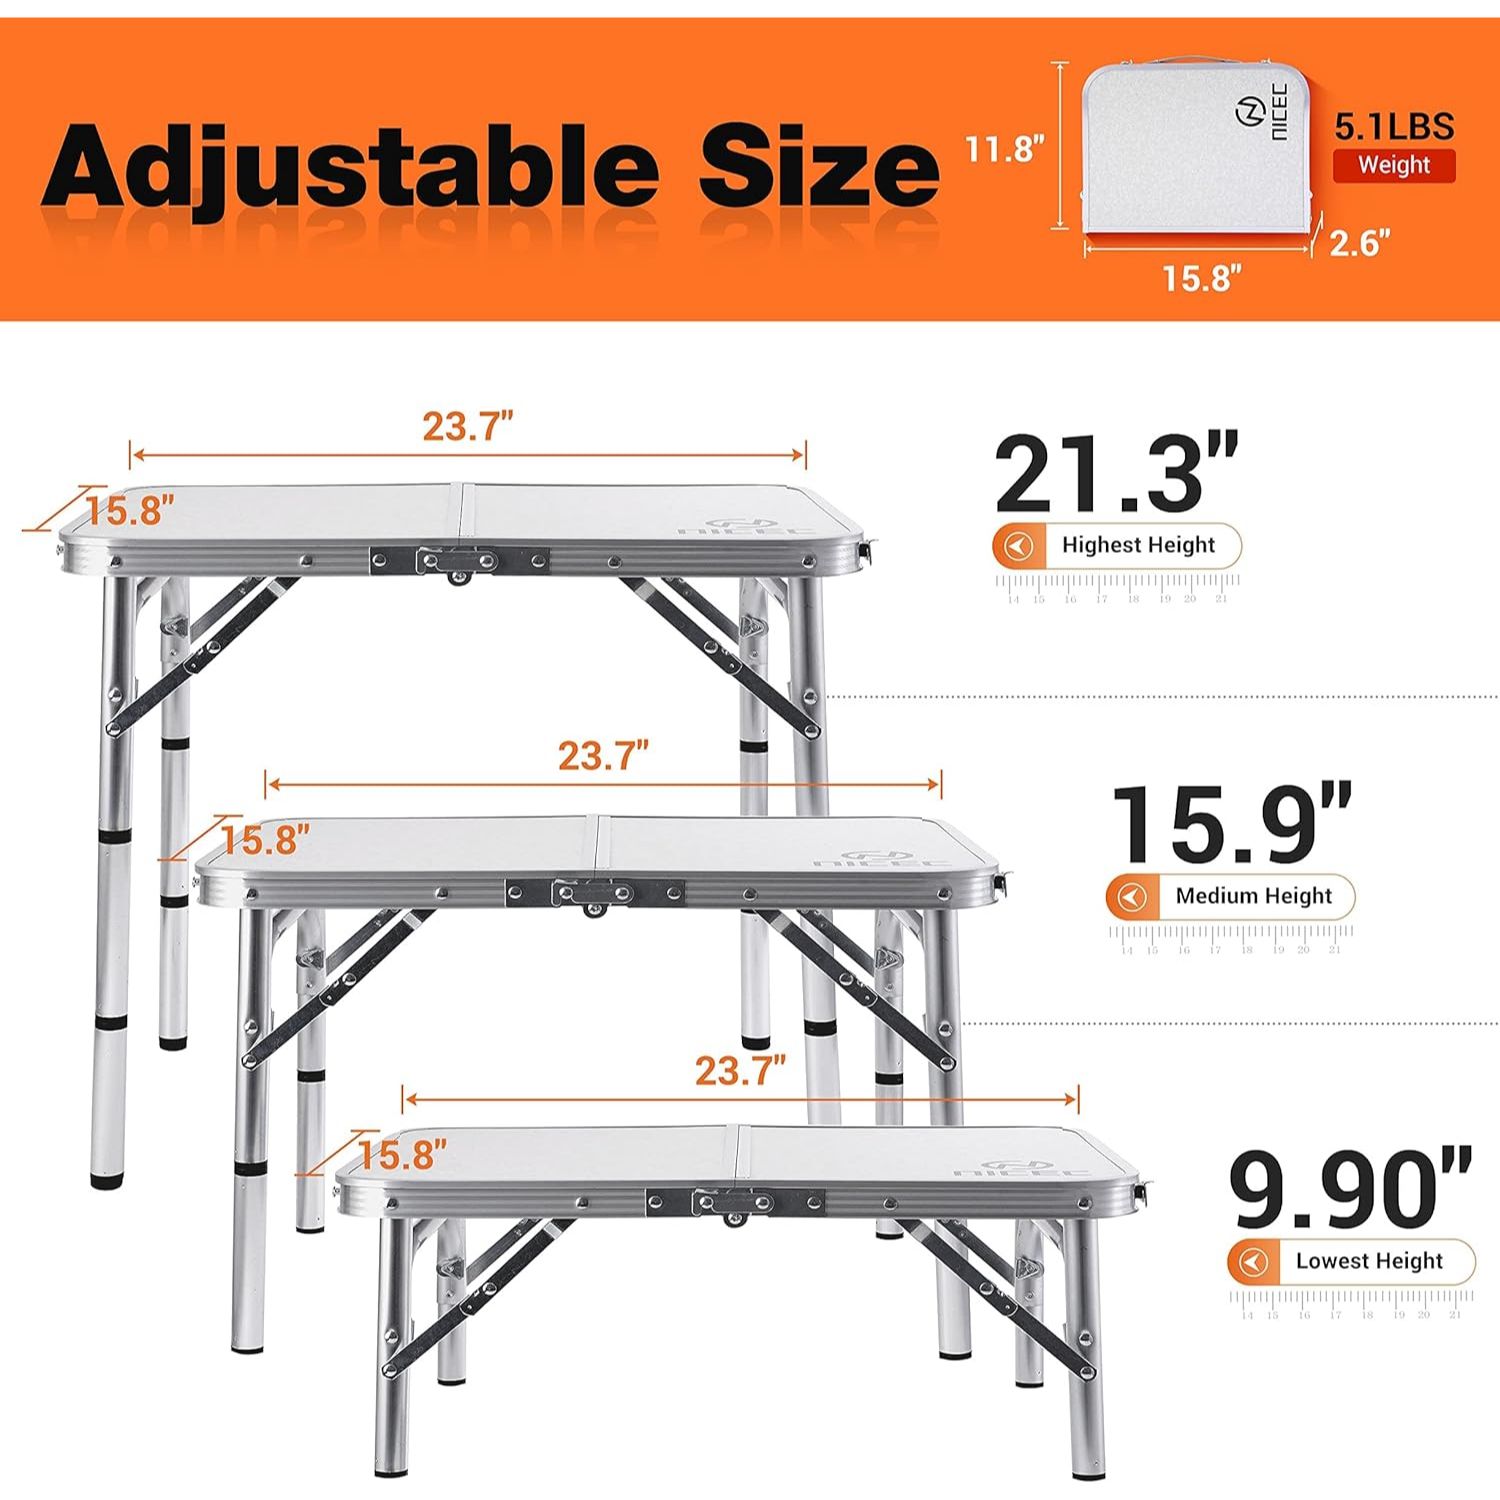 

Versatile Adjustable Height Lightweight Aluminum Folding Table With Carry Handle For Indoor, Outdoor, Camping, Beach, And Office Use